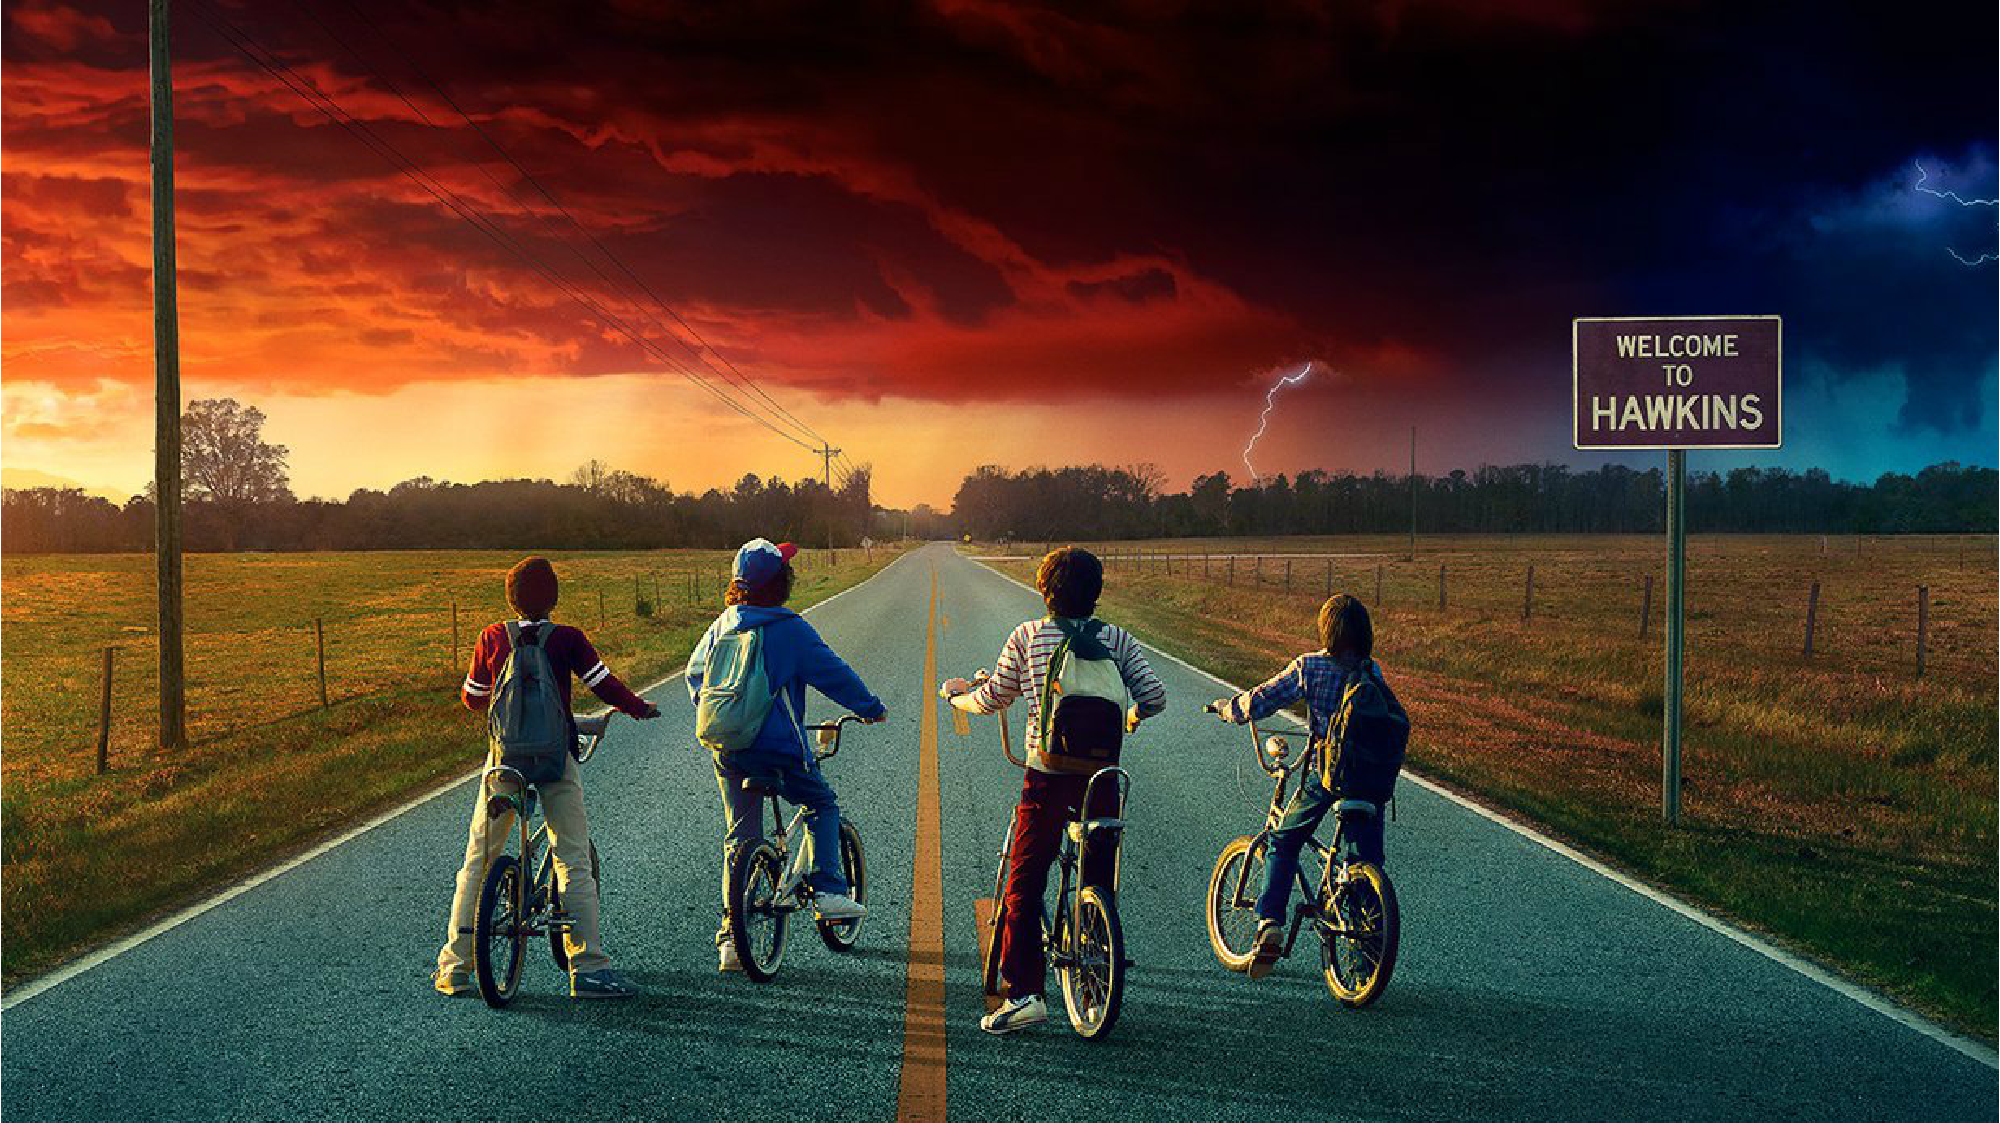 “Stranger Things 2” promo image of four kids on bikes, stopped on a paved road, looking at a threatening cloud on the horizon.